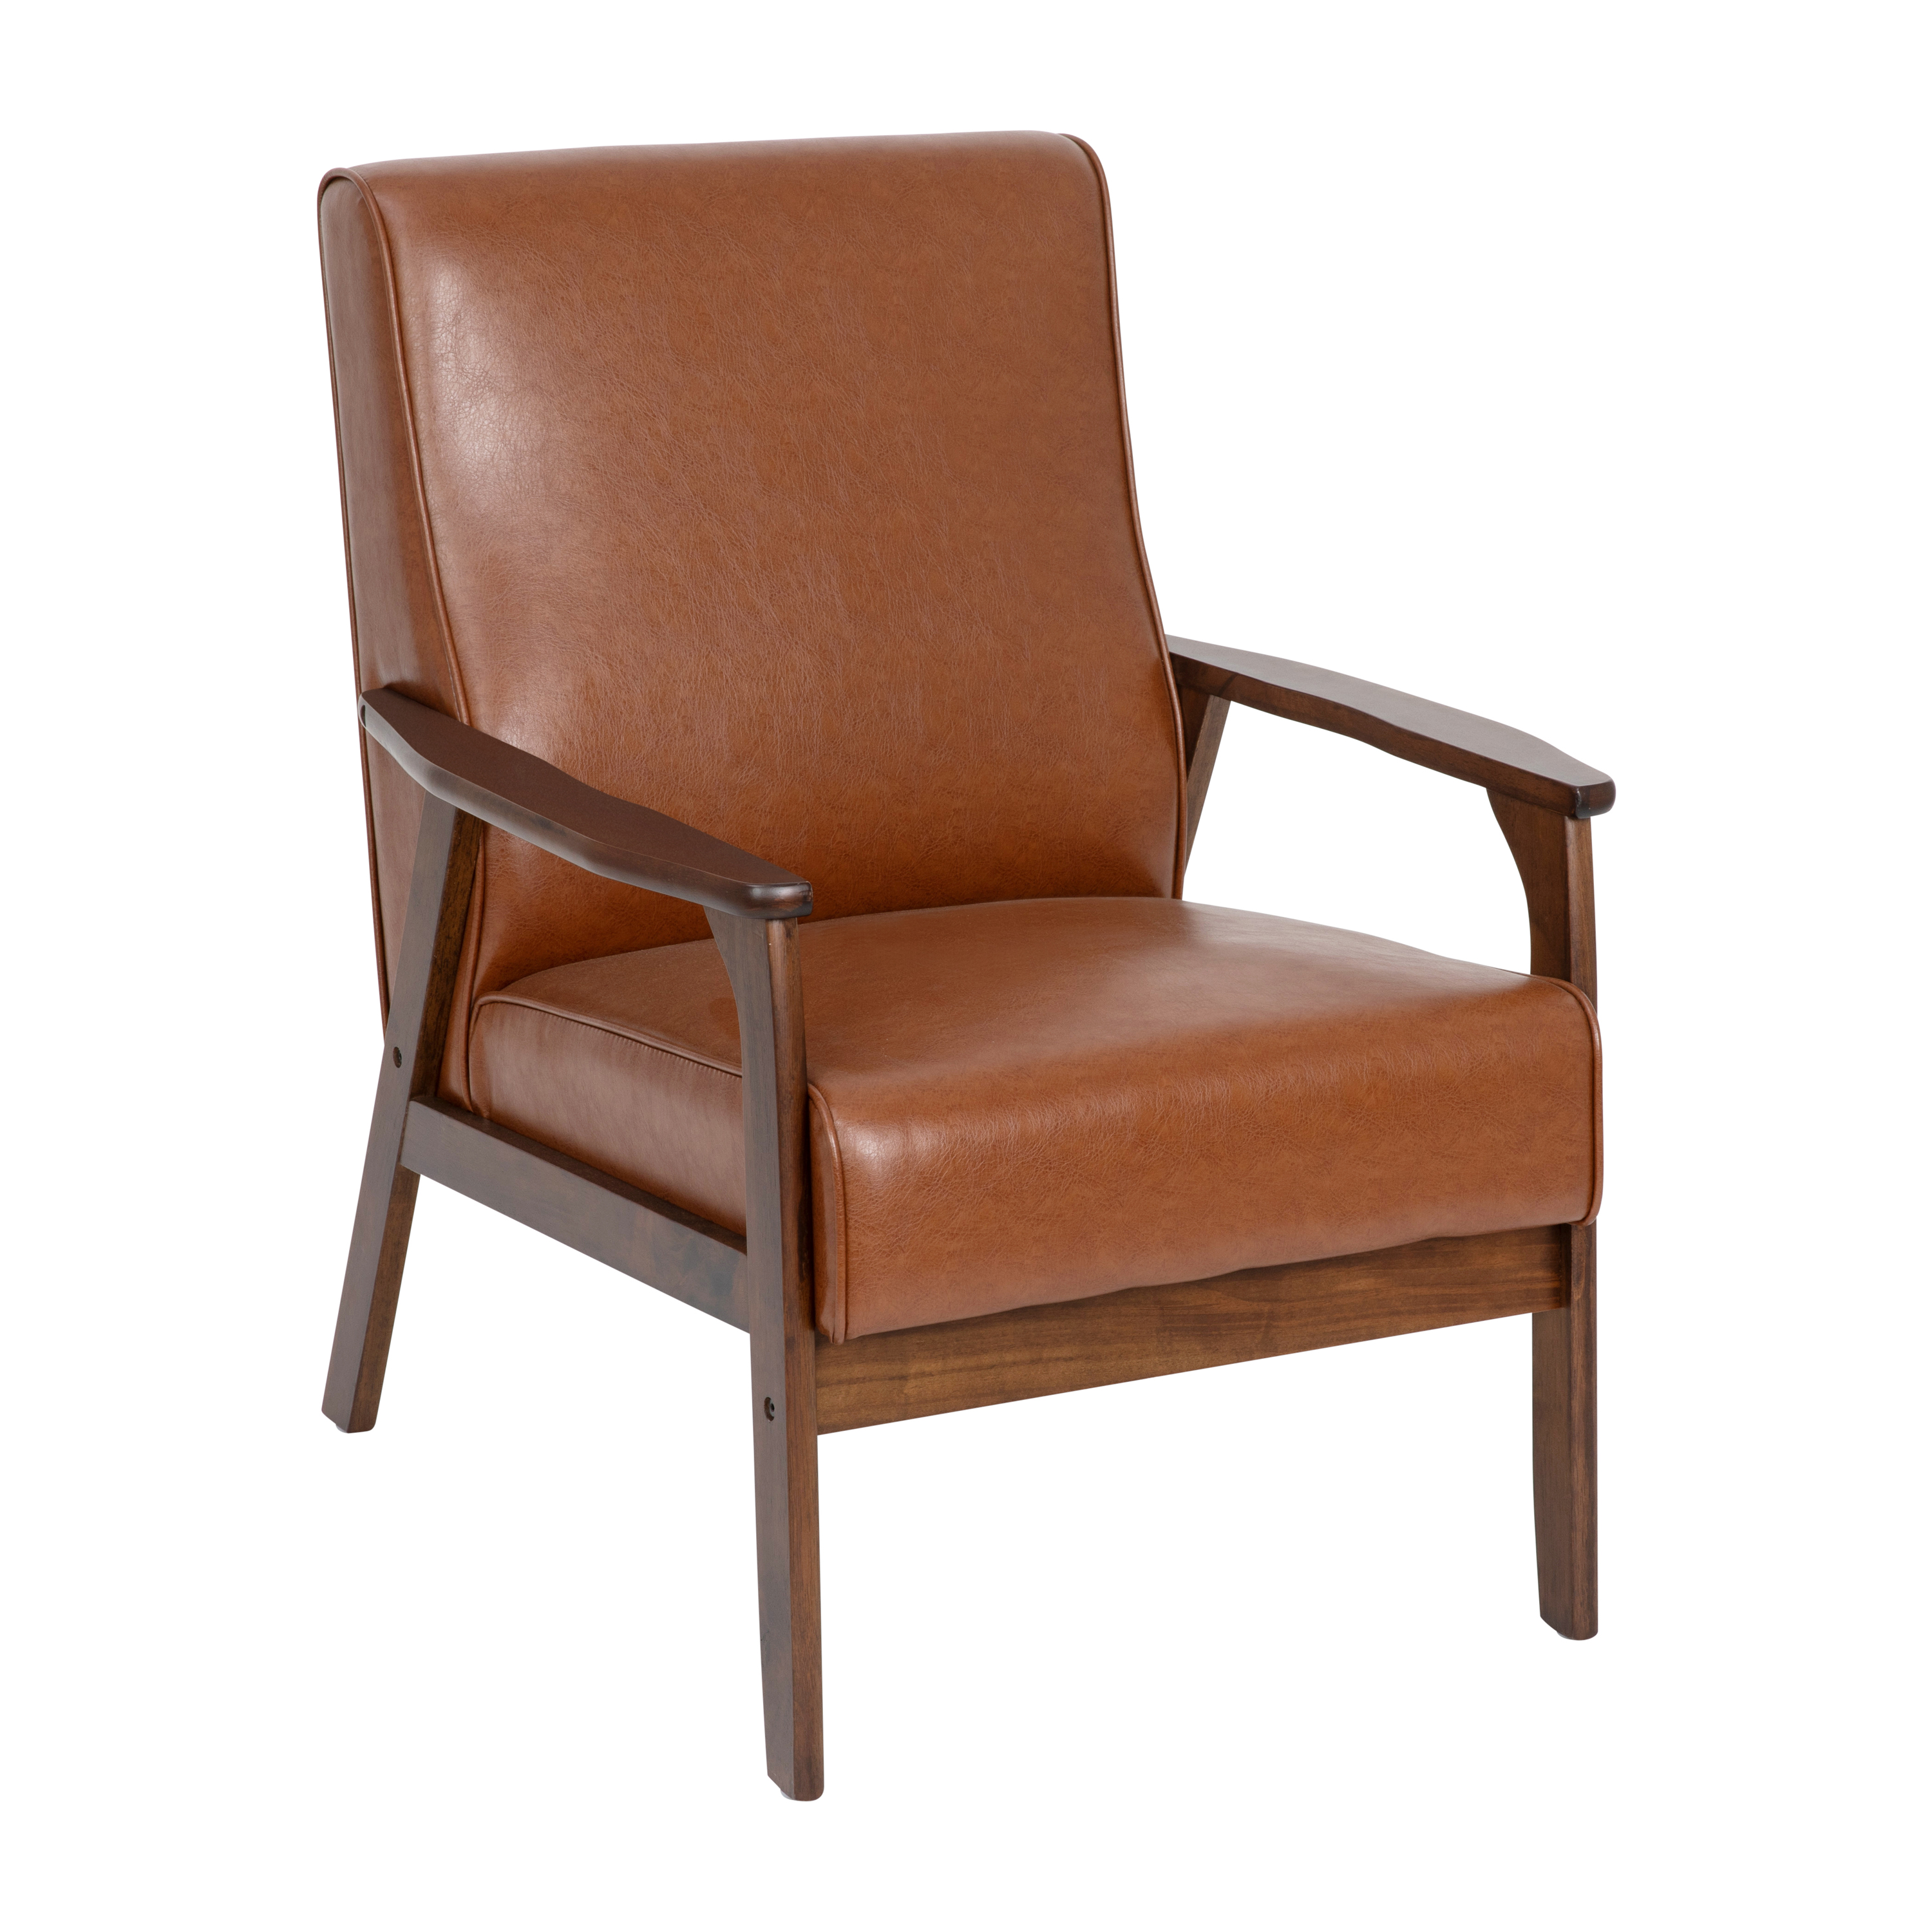 Flash Furniture IS-IT673317-BR-GG Mid-Century Modern Cognac LeatherSoft Armchair with Walnut Wood Frame